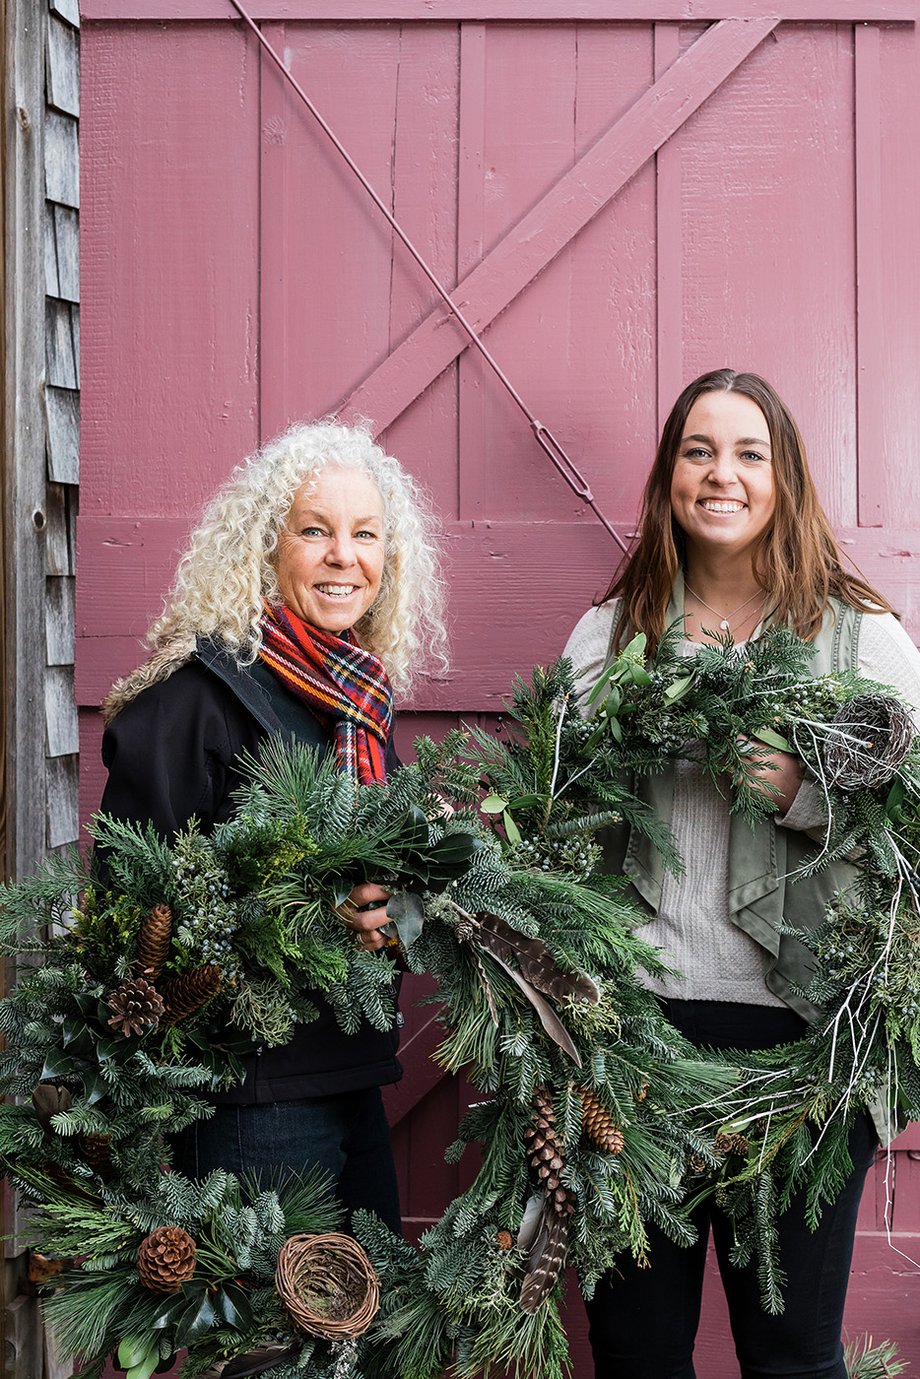 Holiday wreath-making party shot by Joyelle West for Country Home Magazine